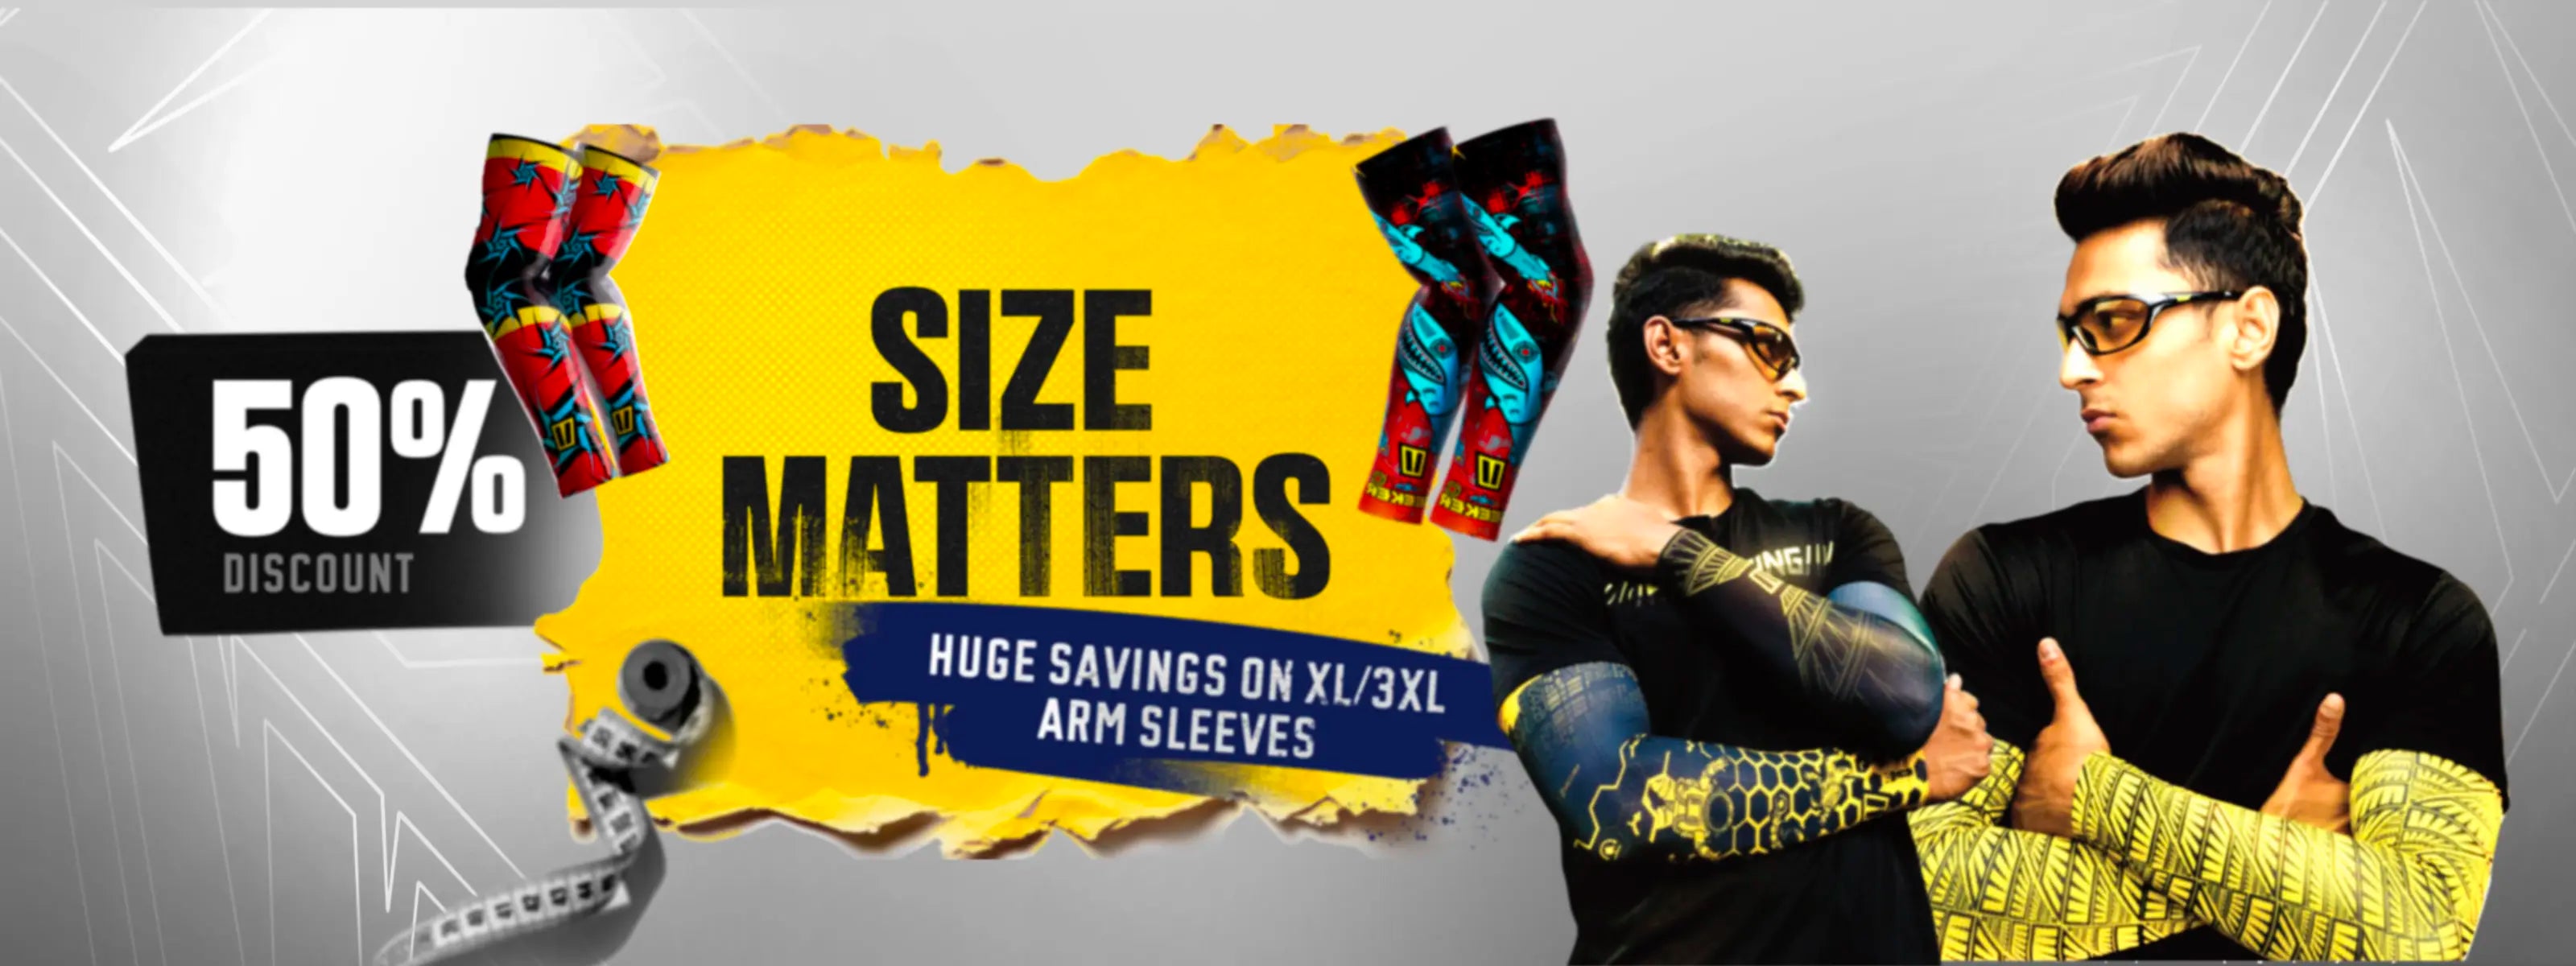 Arm Sleeves Large Size Discount Banner - Mobile